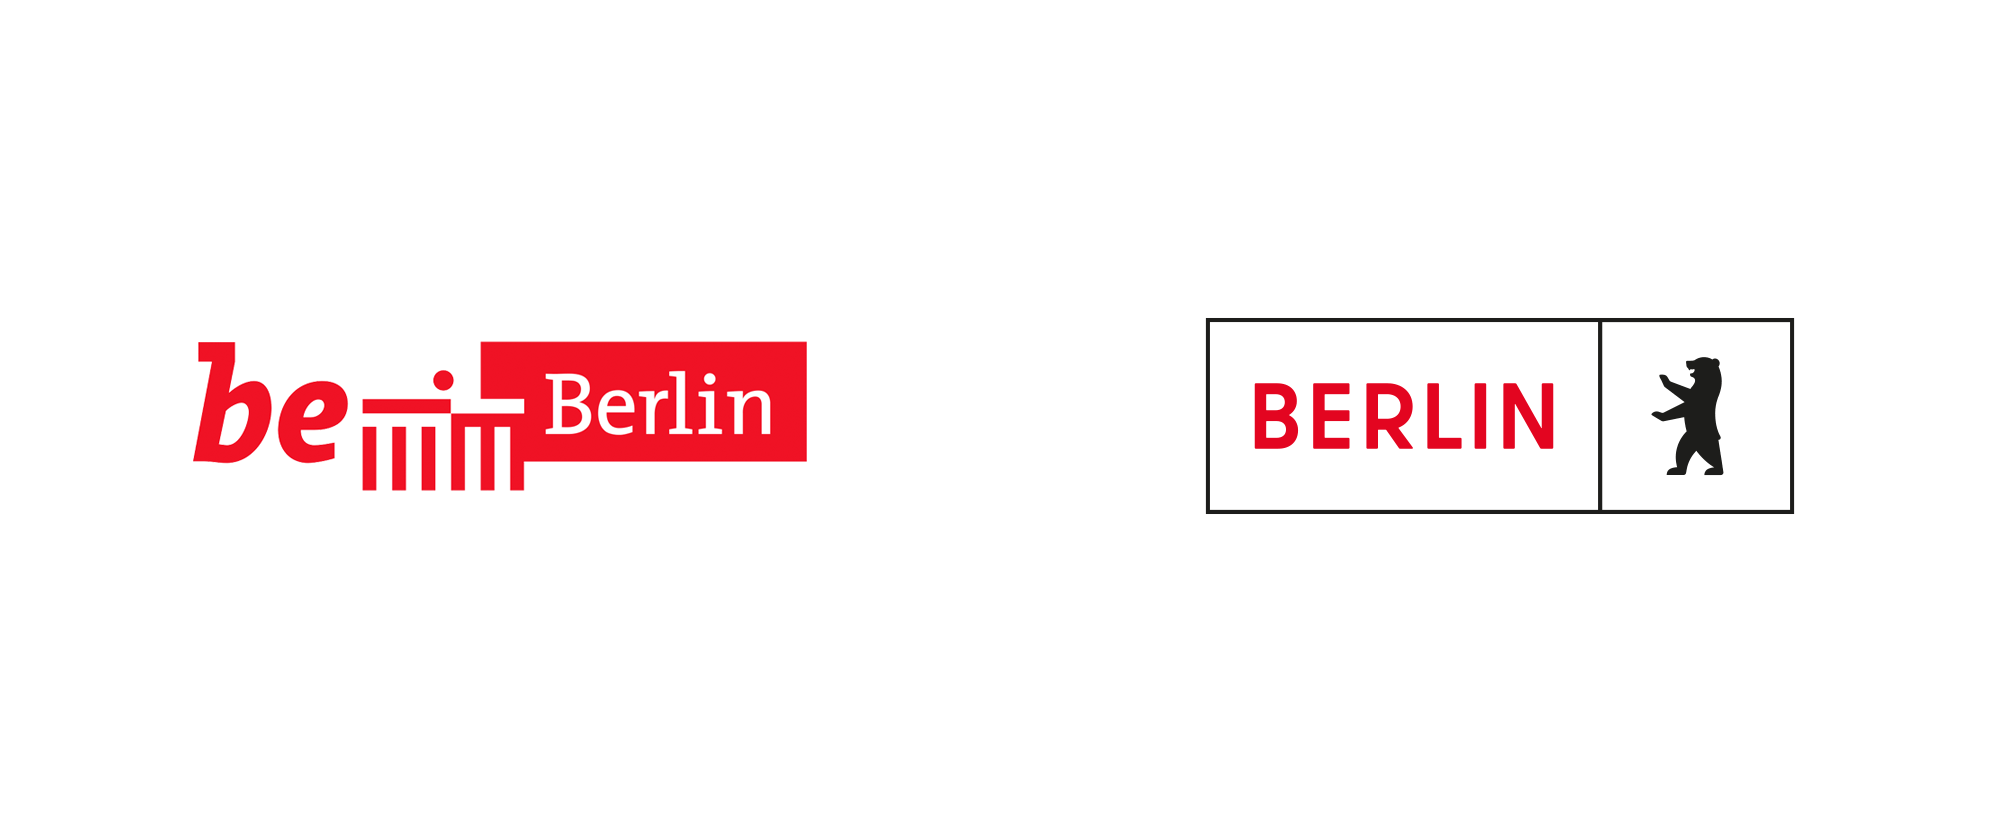 Brand New New Logo And Identity For State Of Berlin By Jung Von Matt